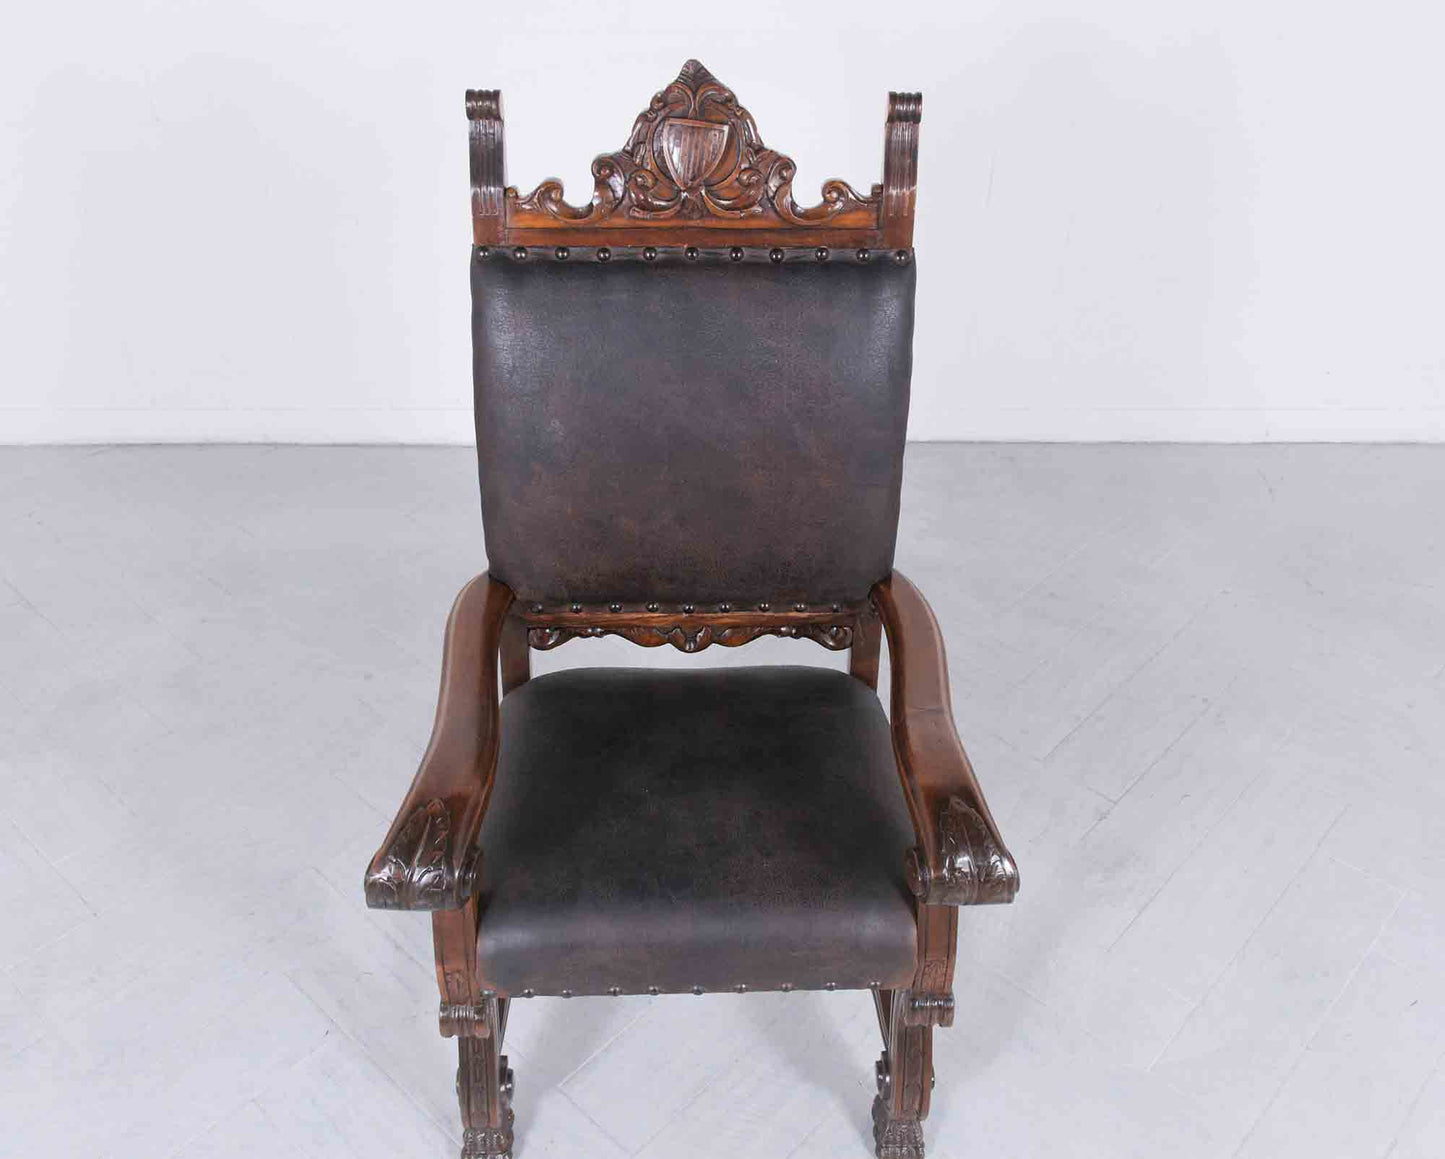 Pair of Leather Throne Armchairs